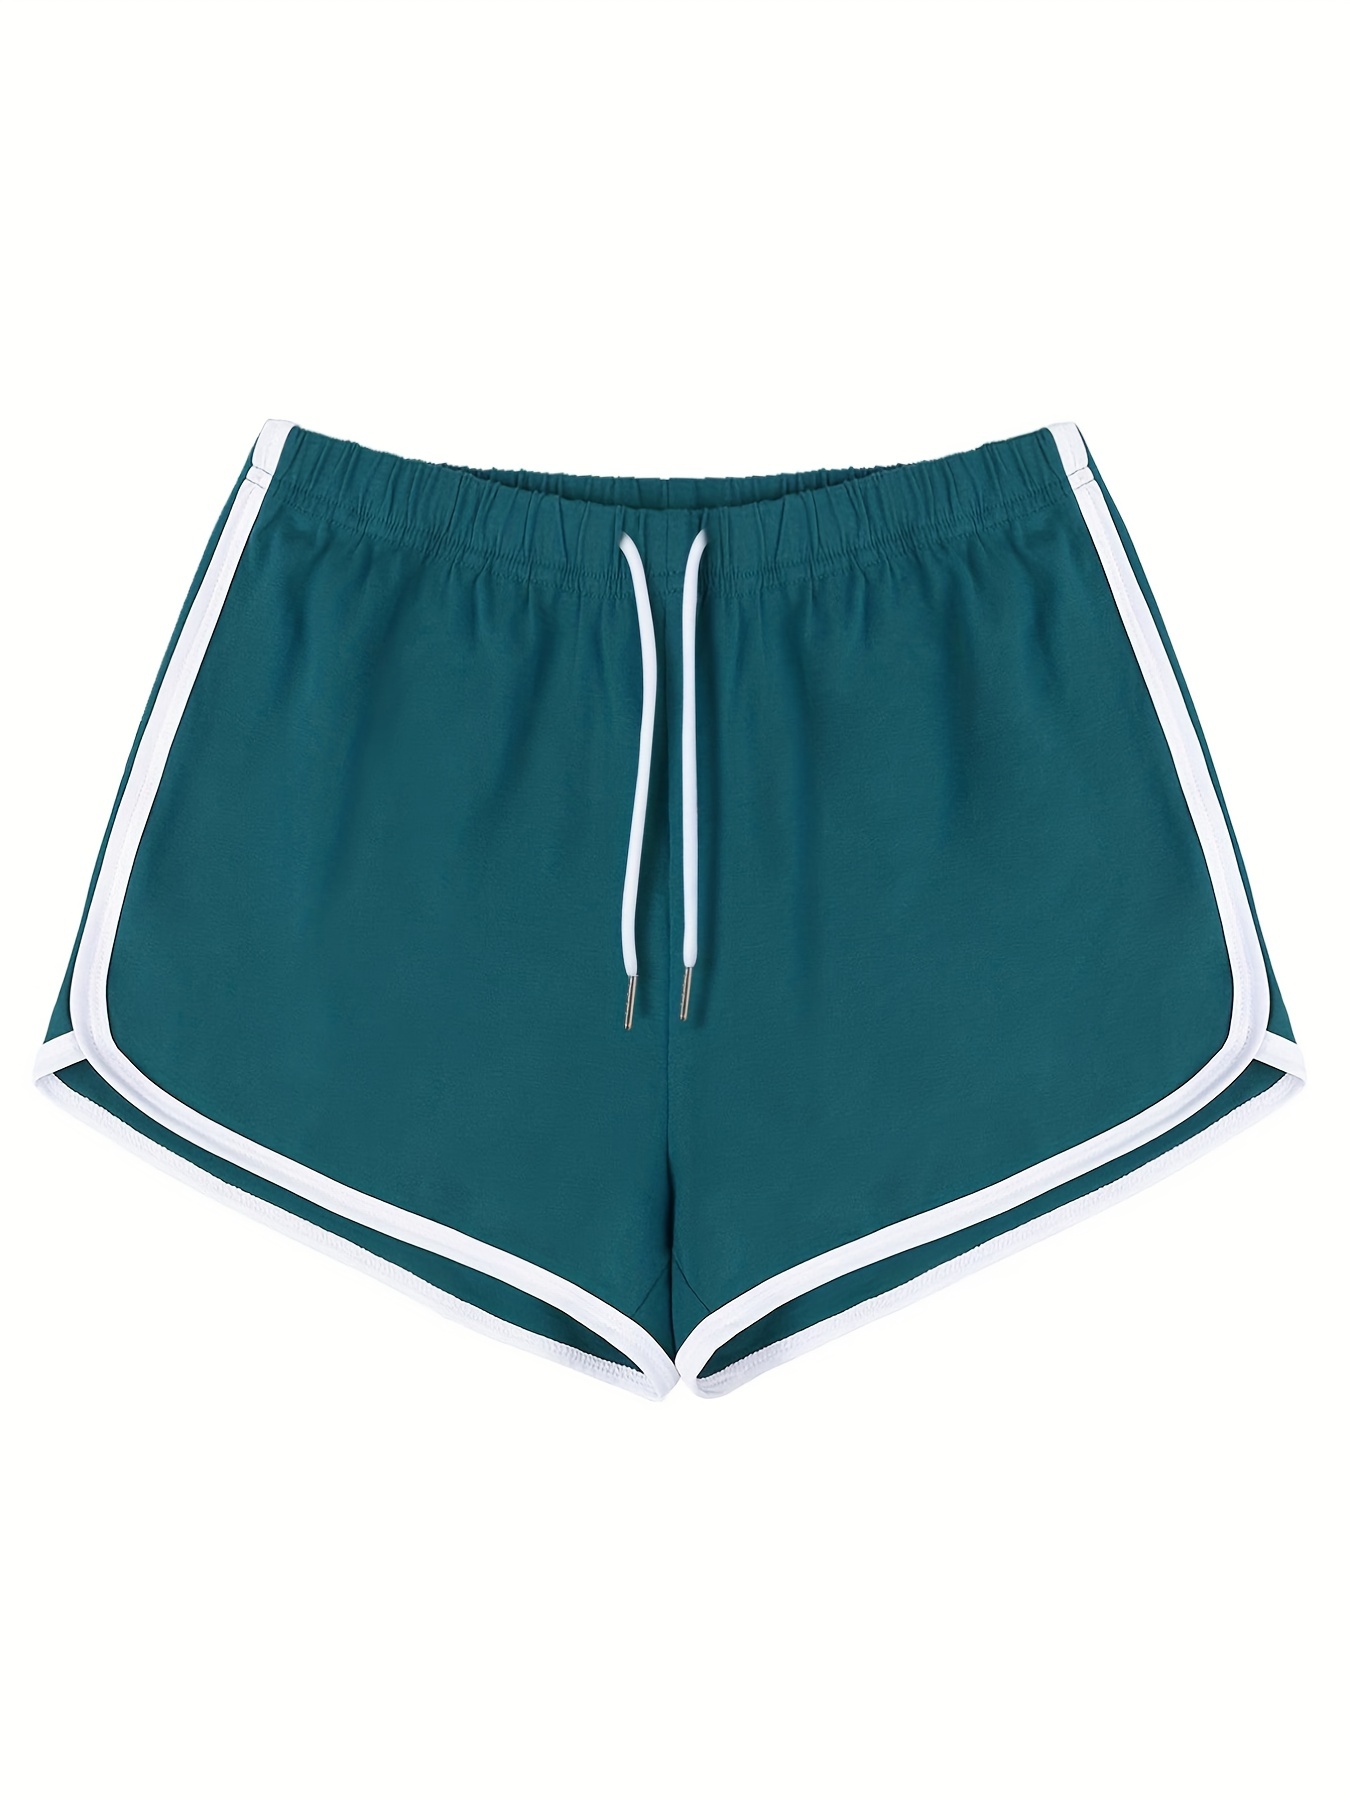  Teal Cute Whale Animal Nautical Running Shorts for Women High  Waisted Athletic Shorts Quick Dry Workout Sports with Pockets-S : Clothing,  Shoes & Jewelry